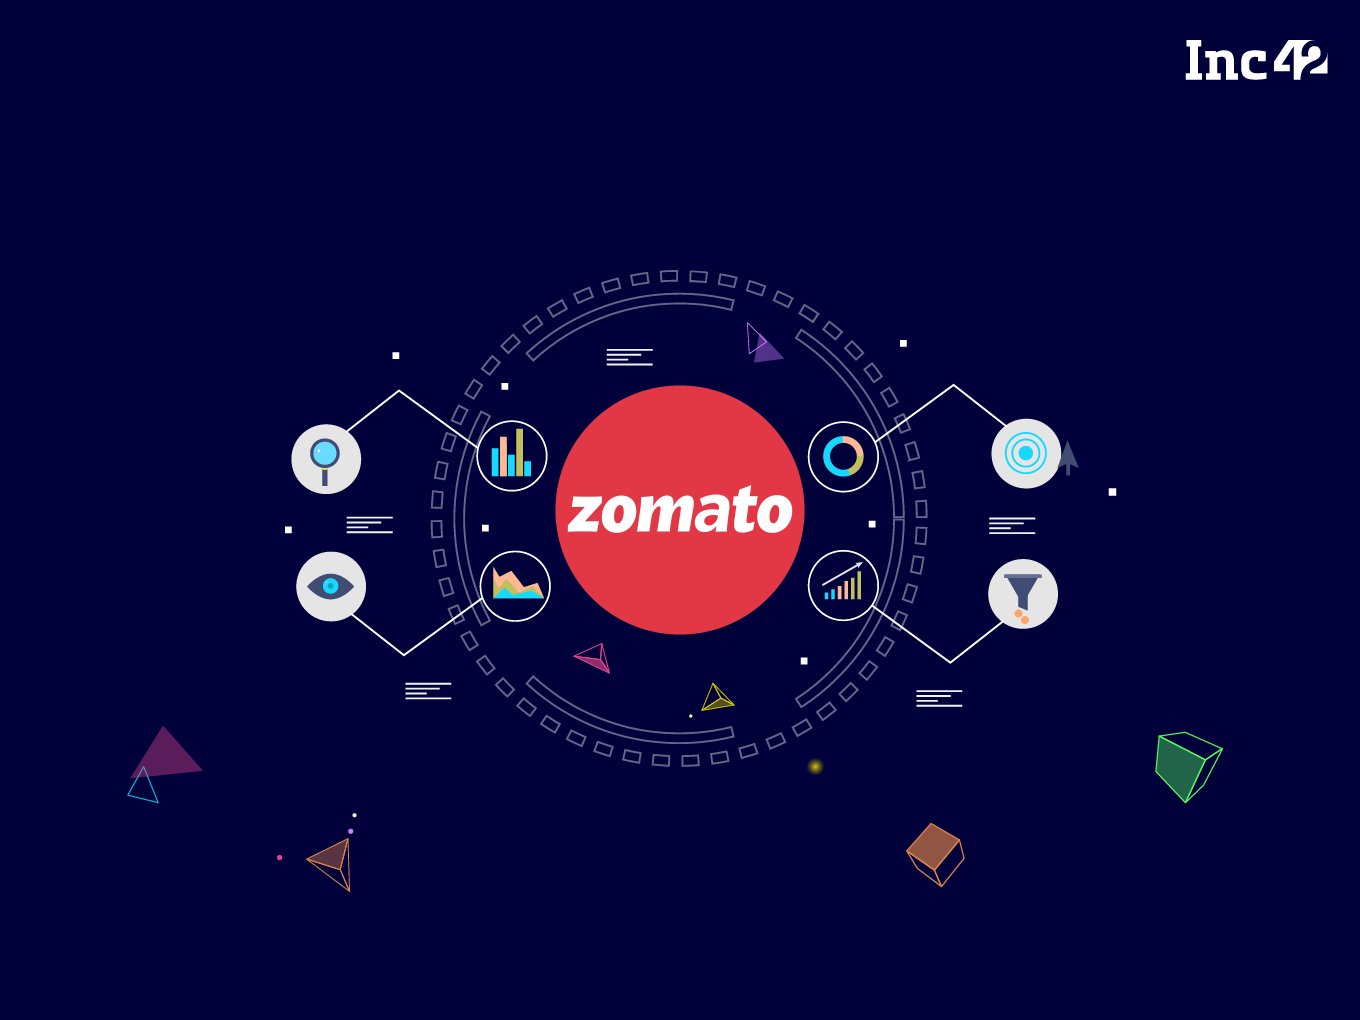 [What The Financials] Amid Protests And Controversy, Zomato Sees 8X Hike In Losses